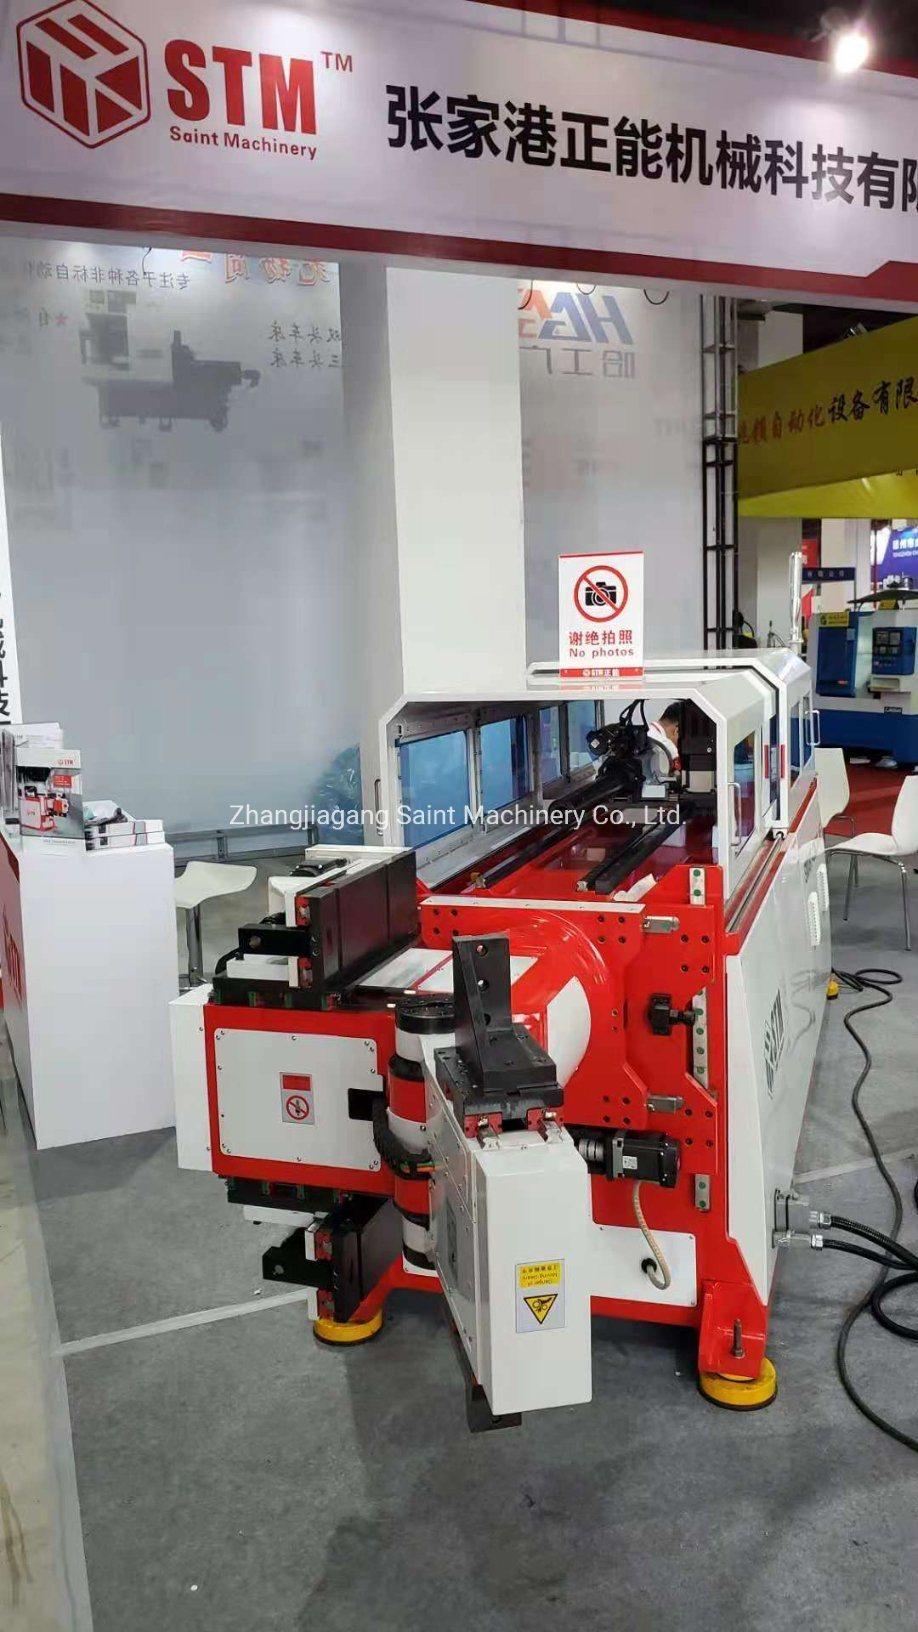 Furniture Making All Electric Left and Right Pipe Bending Machine